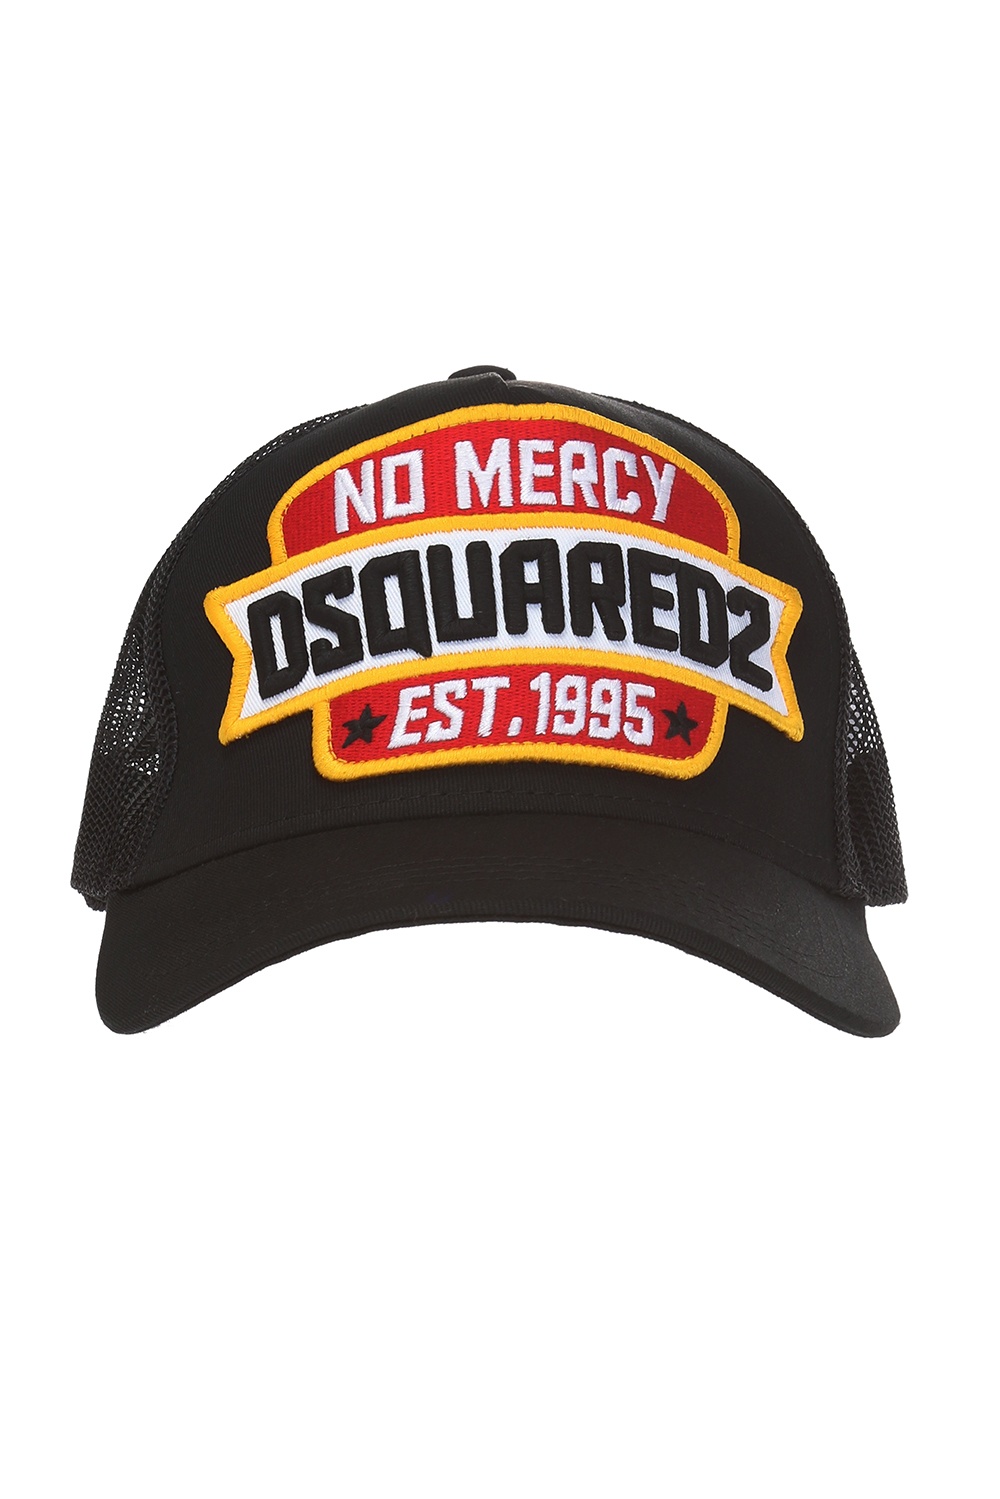 dsquared no mercy